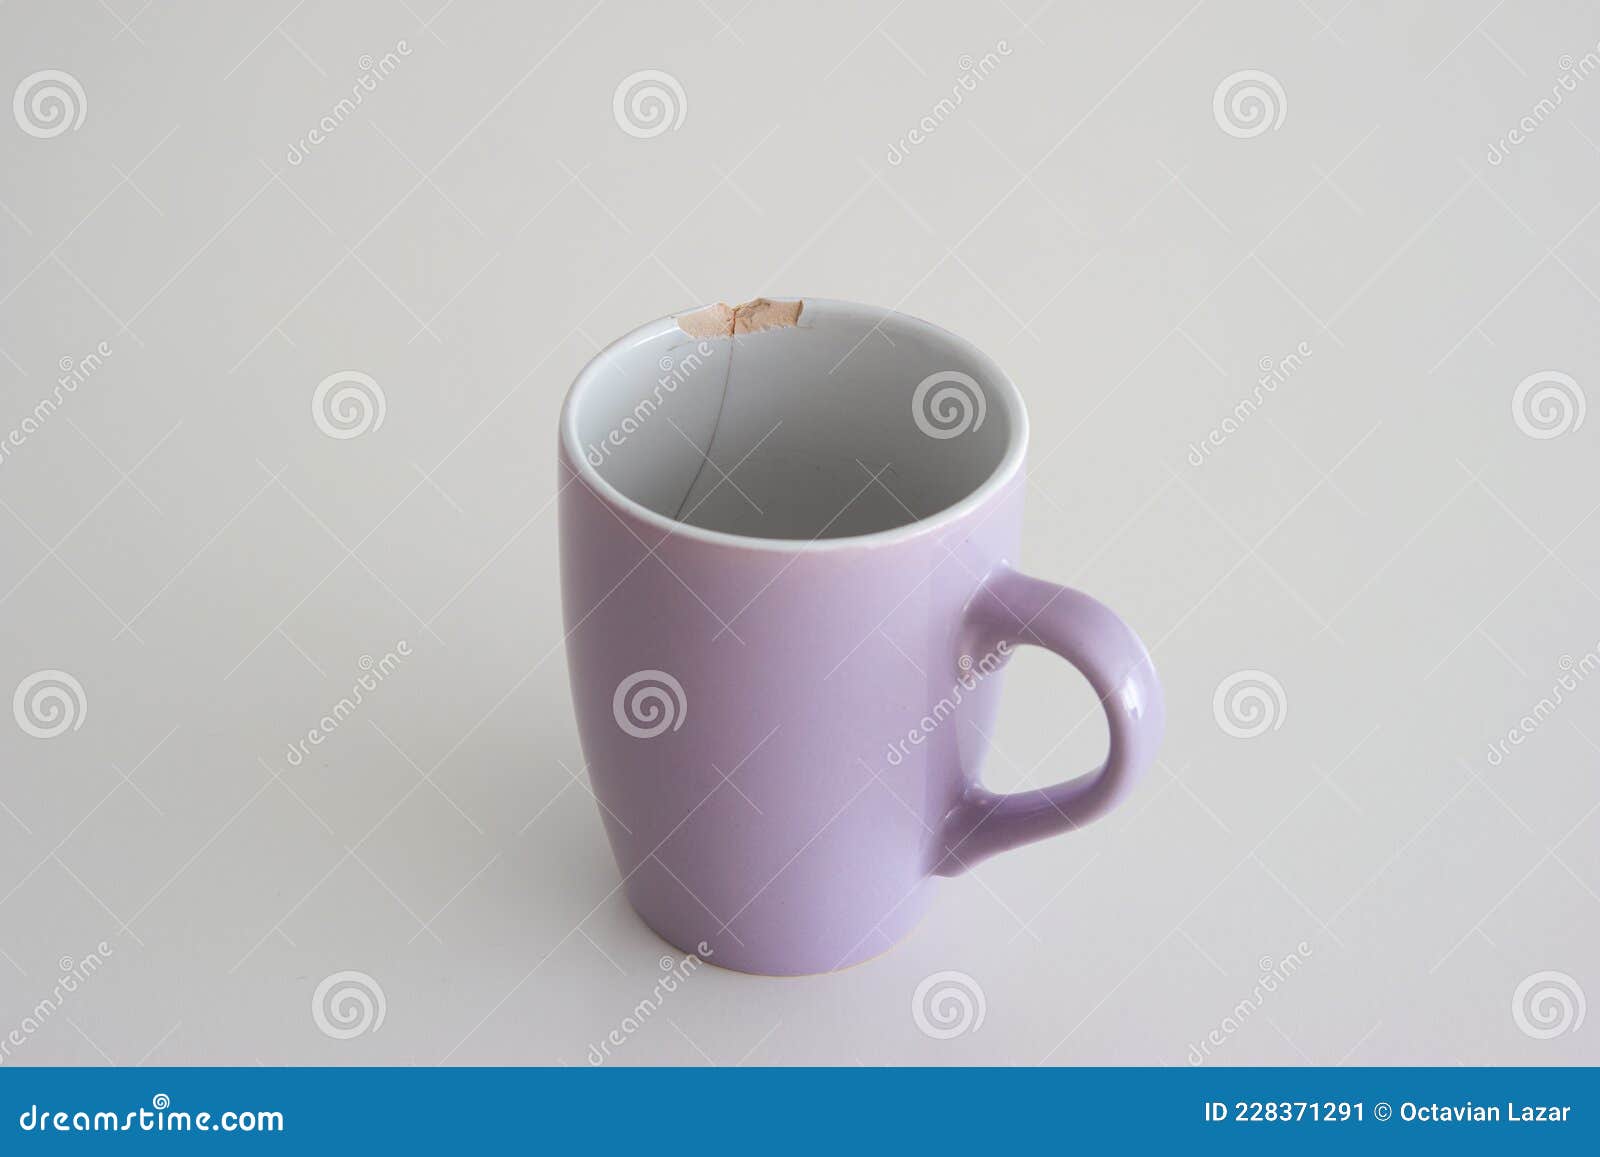 chipped coffee mug on white background, shallow depth of field